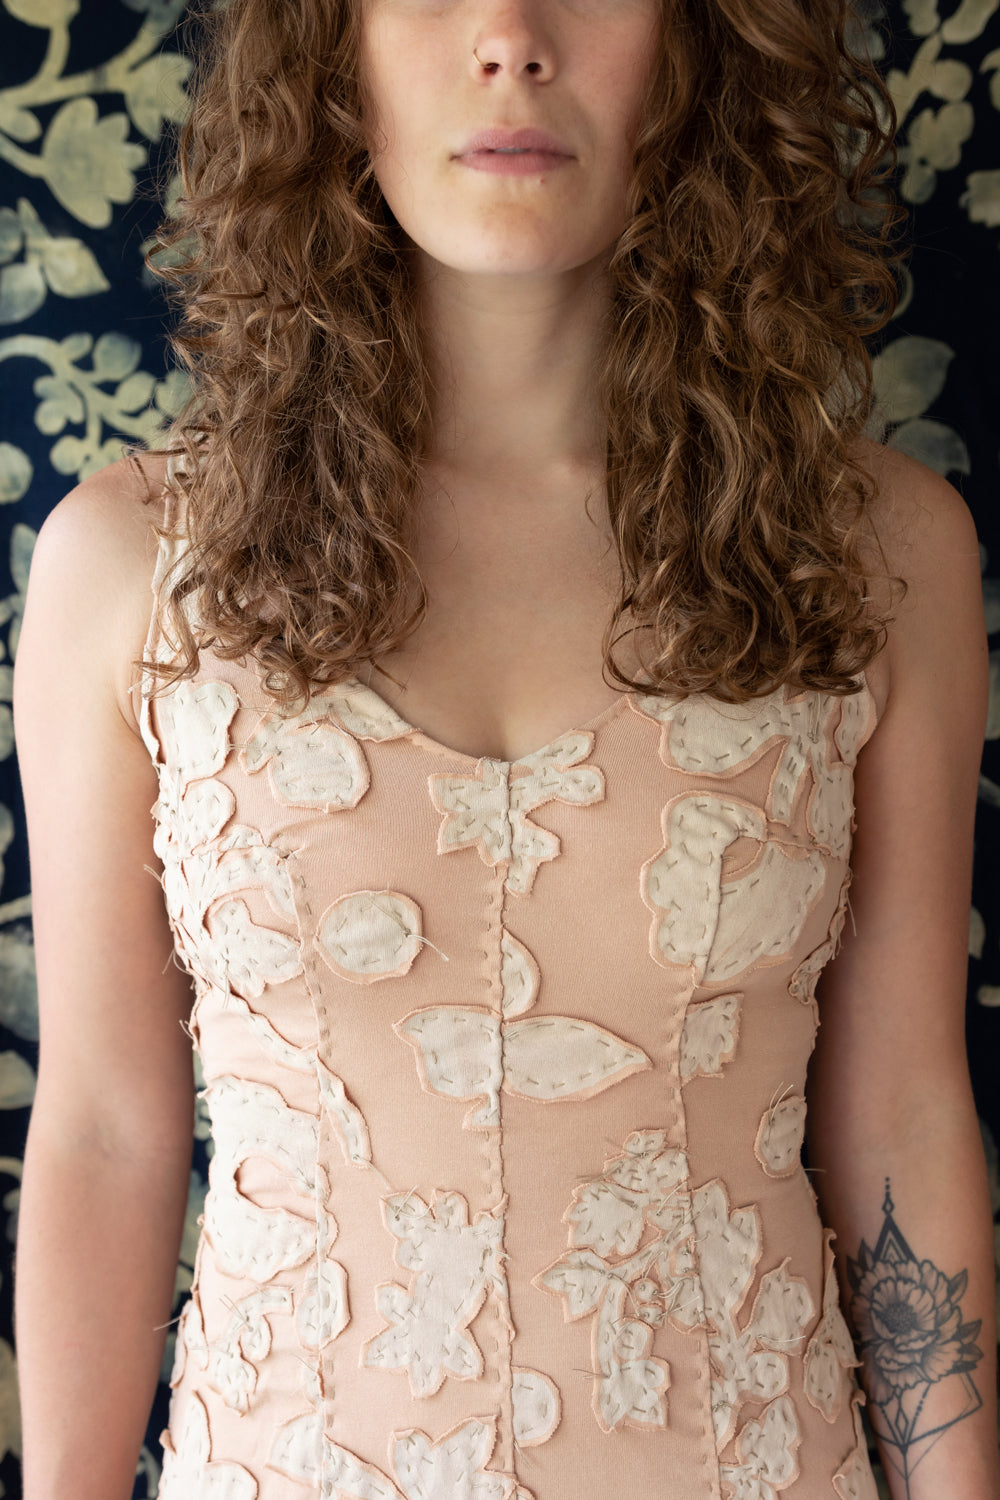 The Greer Top in hand-sewn organic cotton with floral appliqué. Shown on model in vetiver pink colorway.